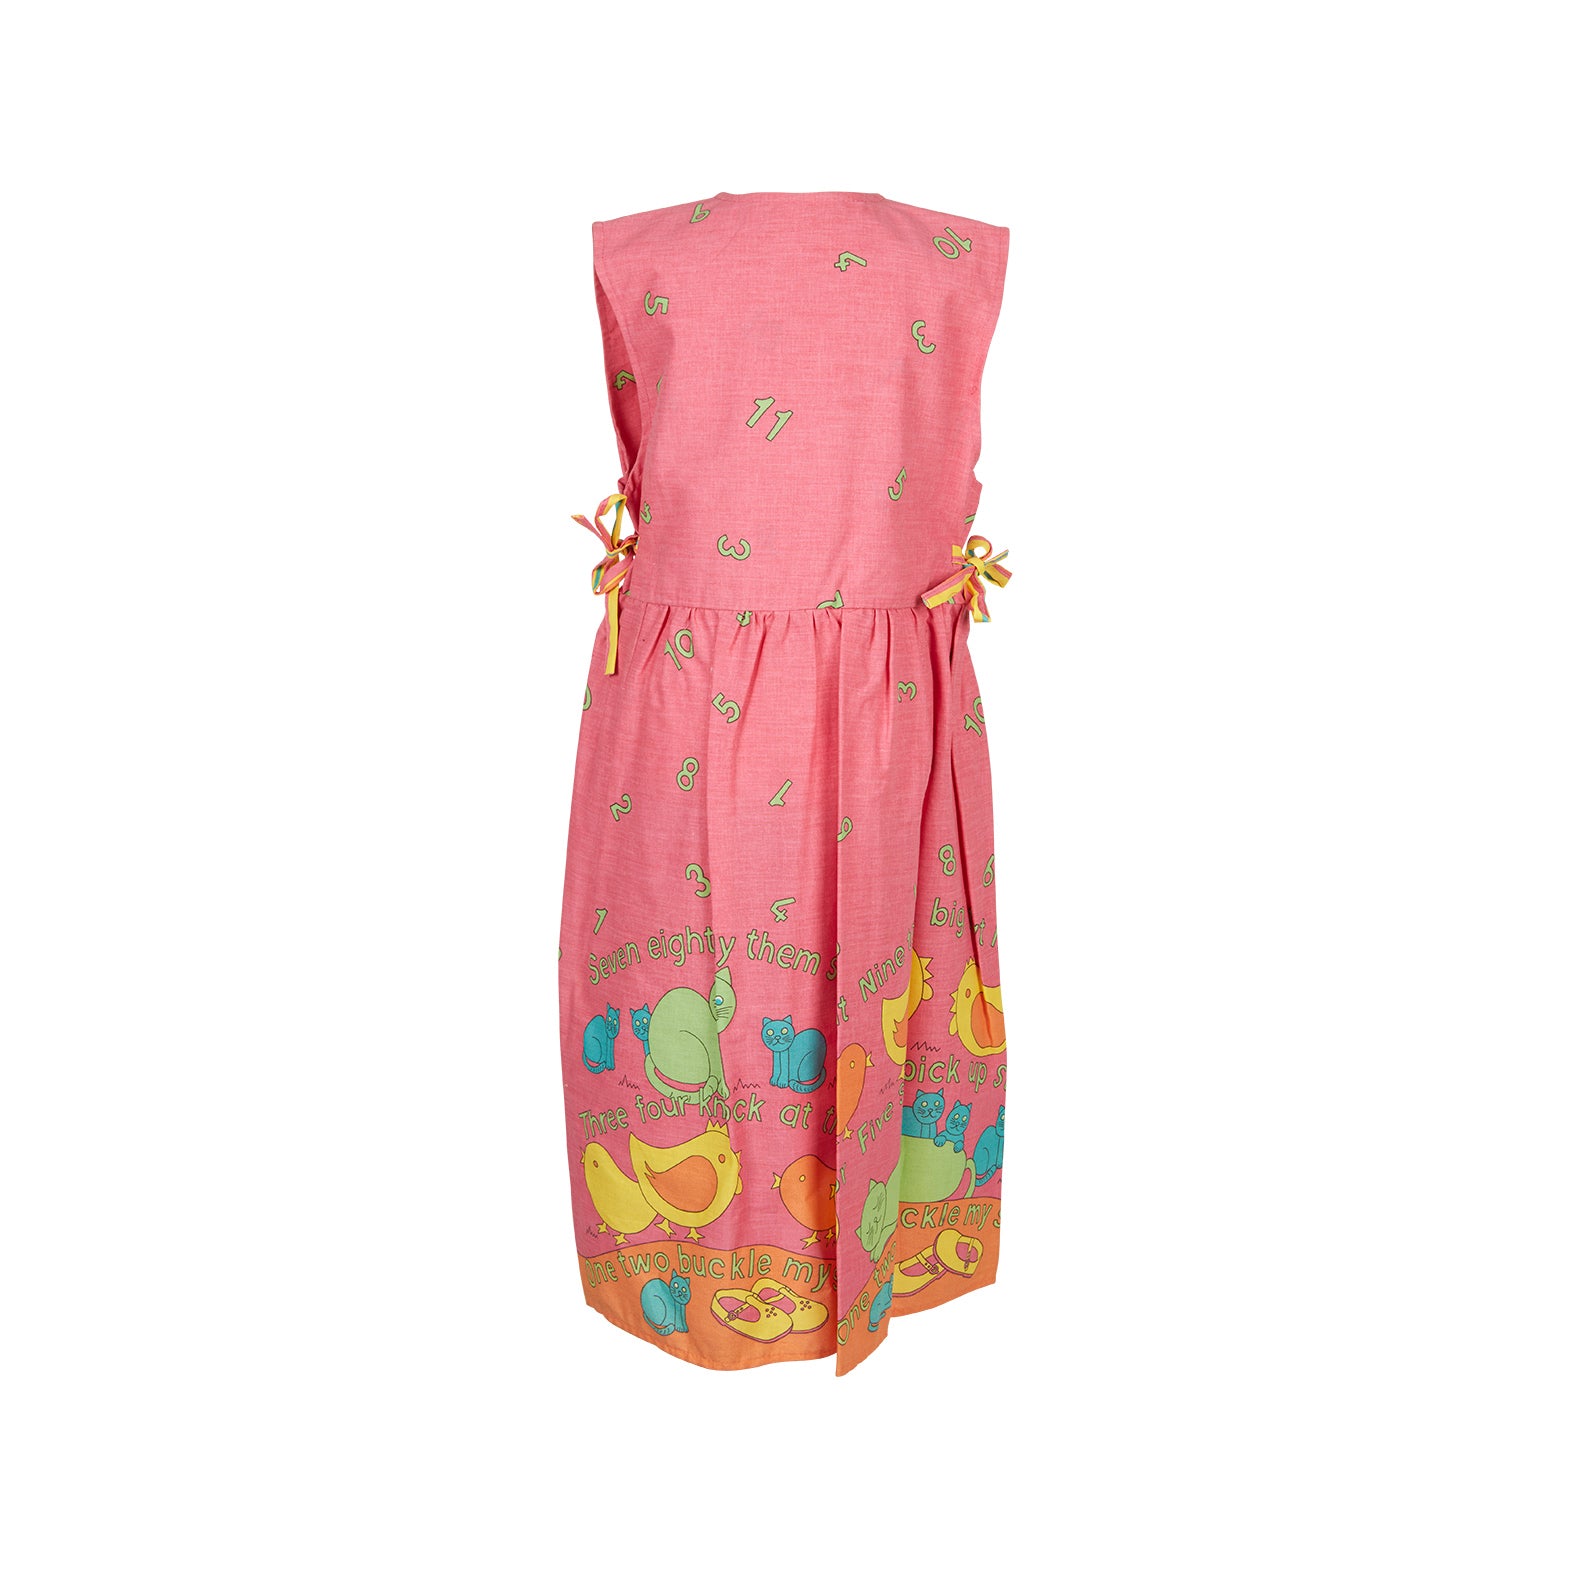 Wrapover Pinafore Dress - Pink Buckle My Shoe